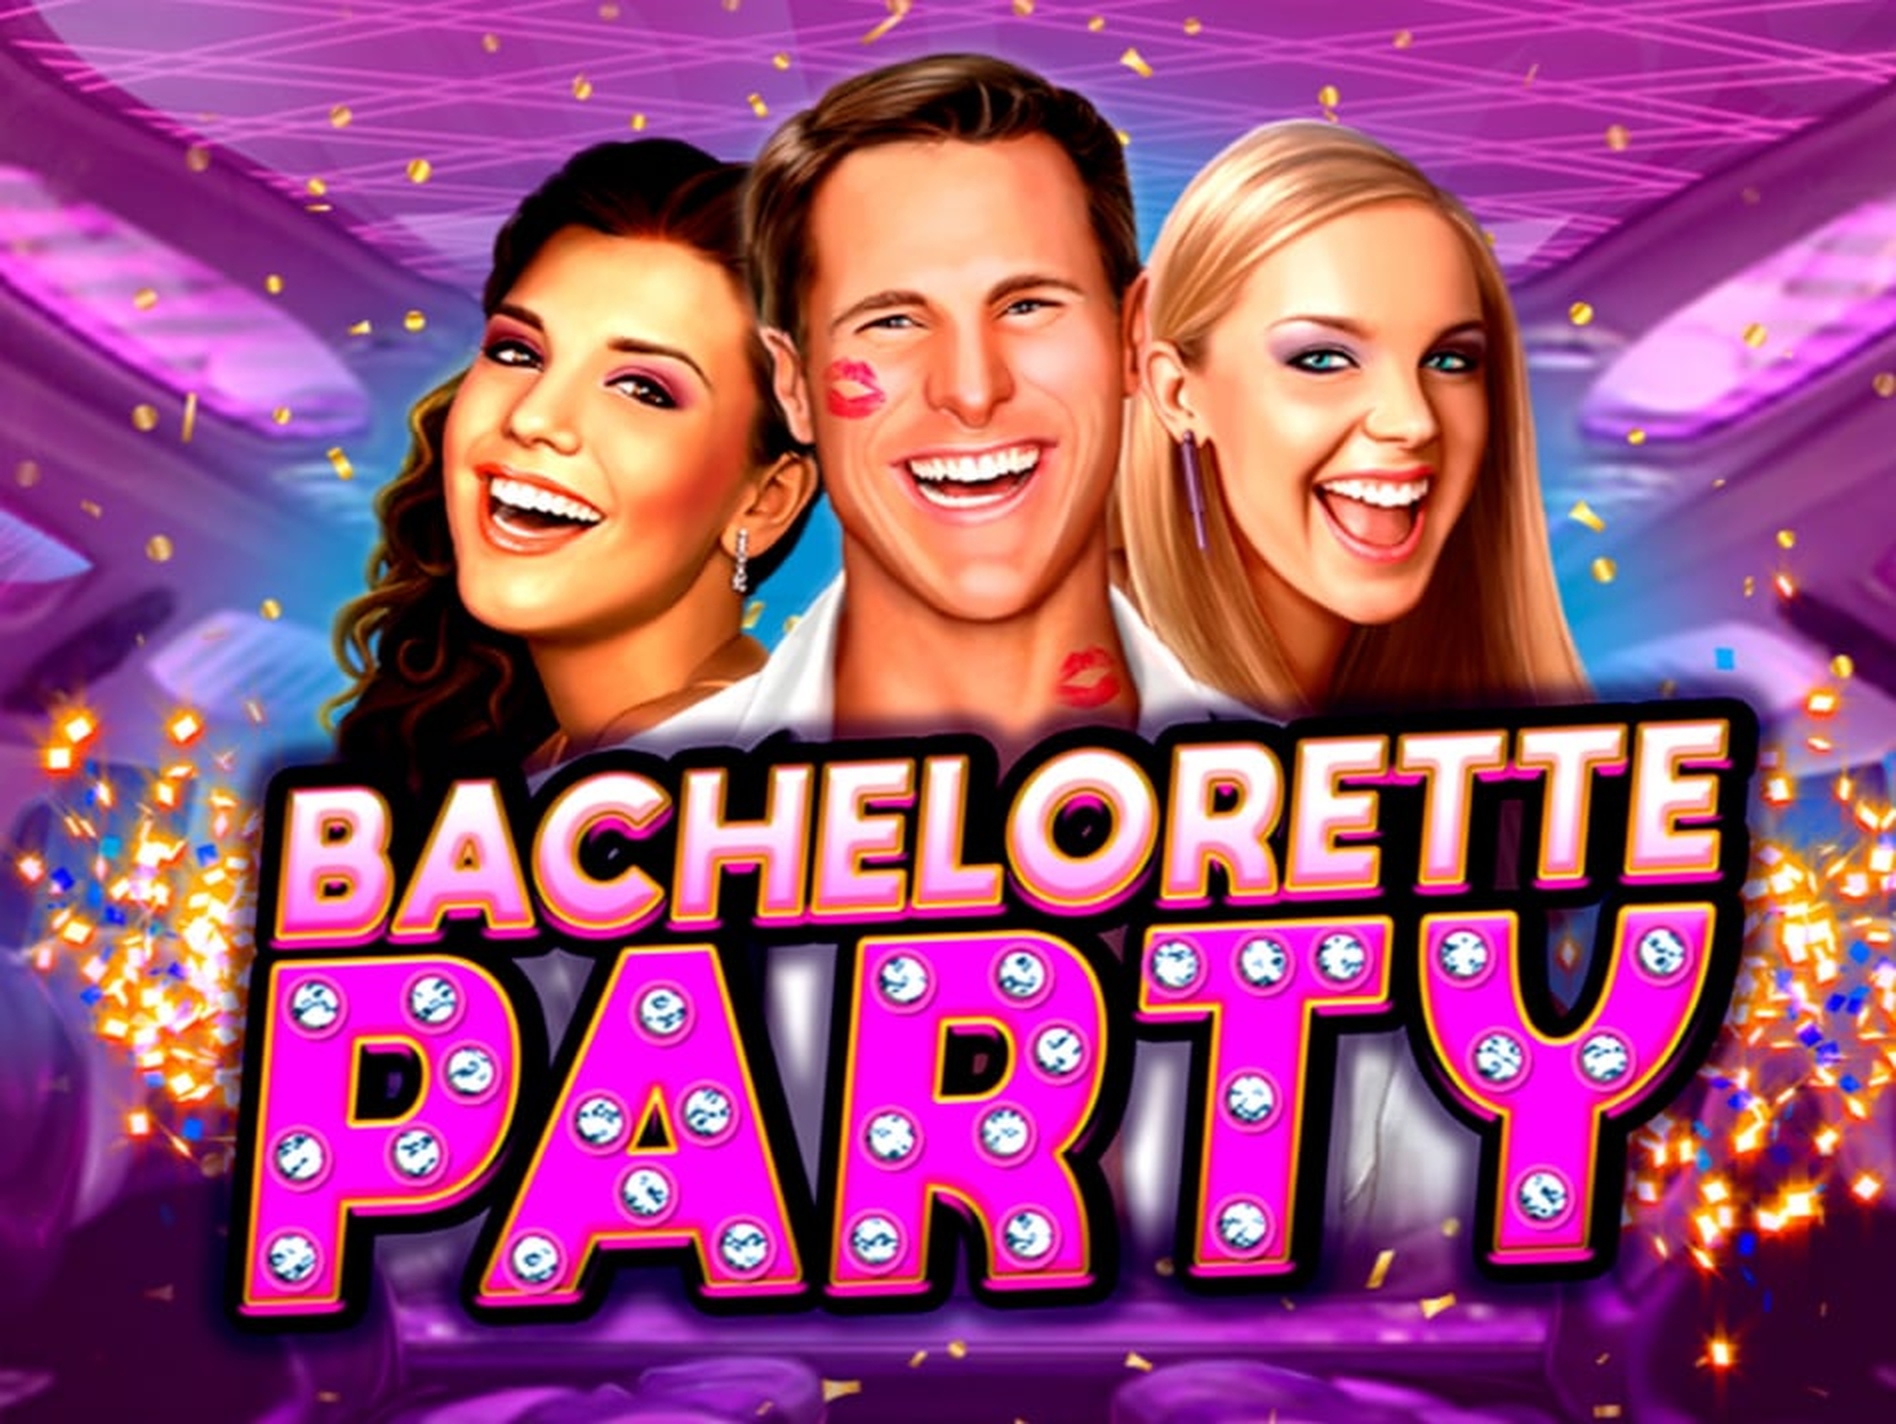 The Bachelorette Party Online Slot Demo Game by Booming Games